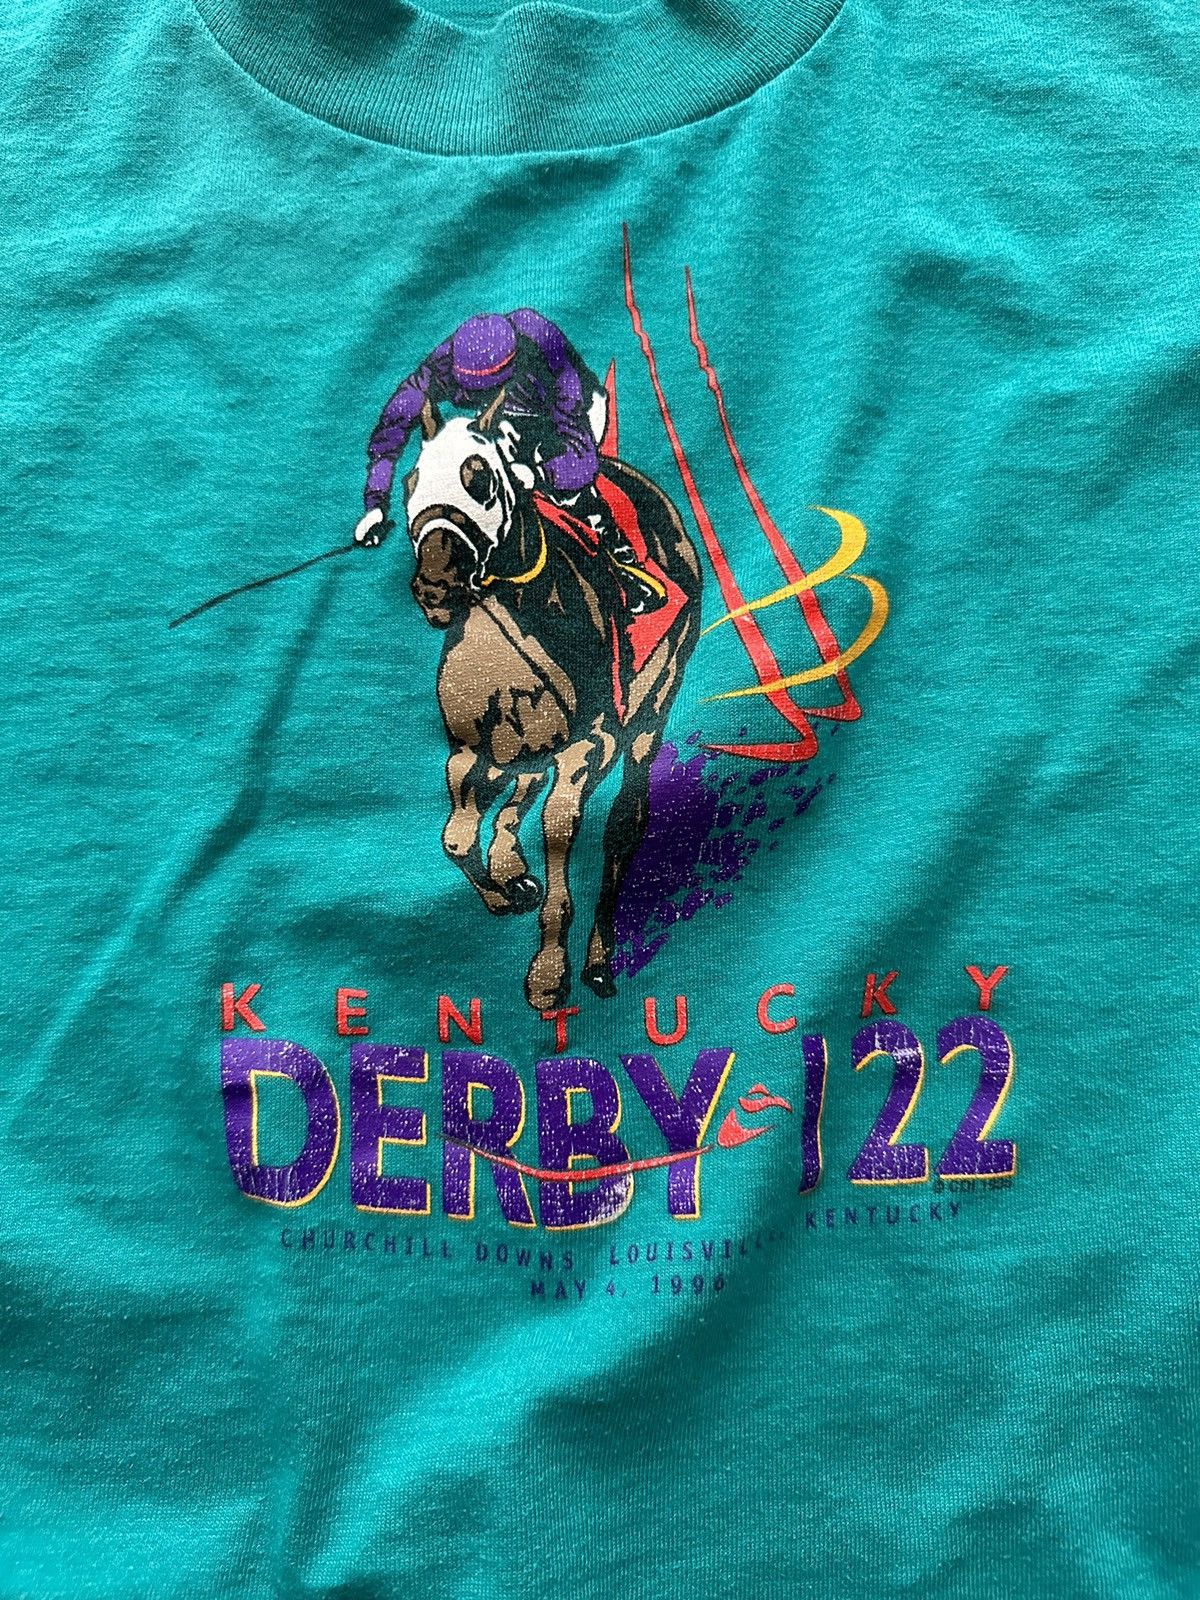 Vintage 1996 Kentucky Derby 122 FOTL Single Stitch Teal Tee Size XS / US 0-2 / IT 36-38 - 2 Preview